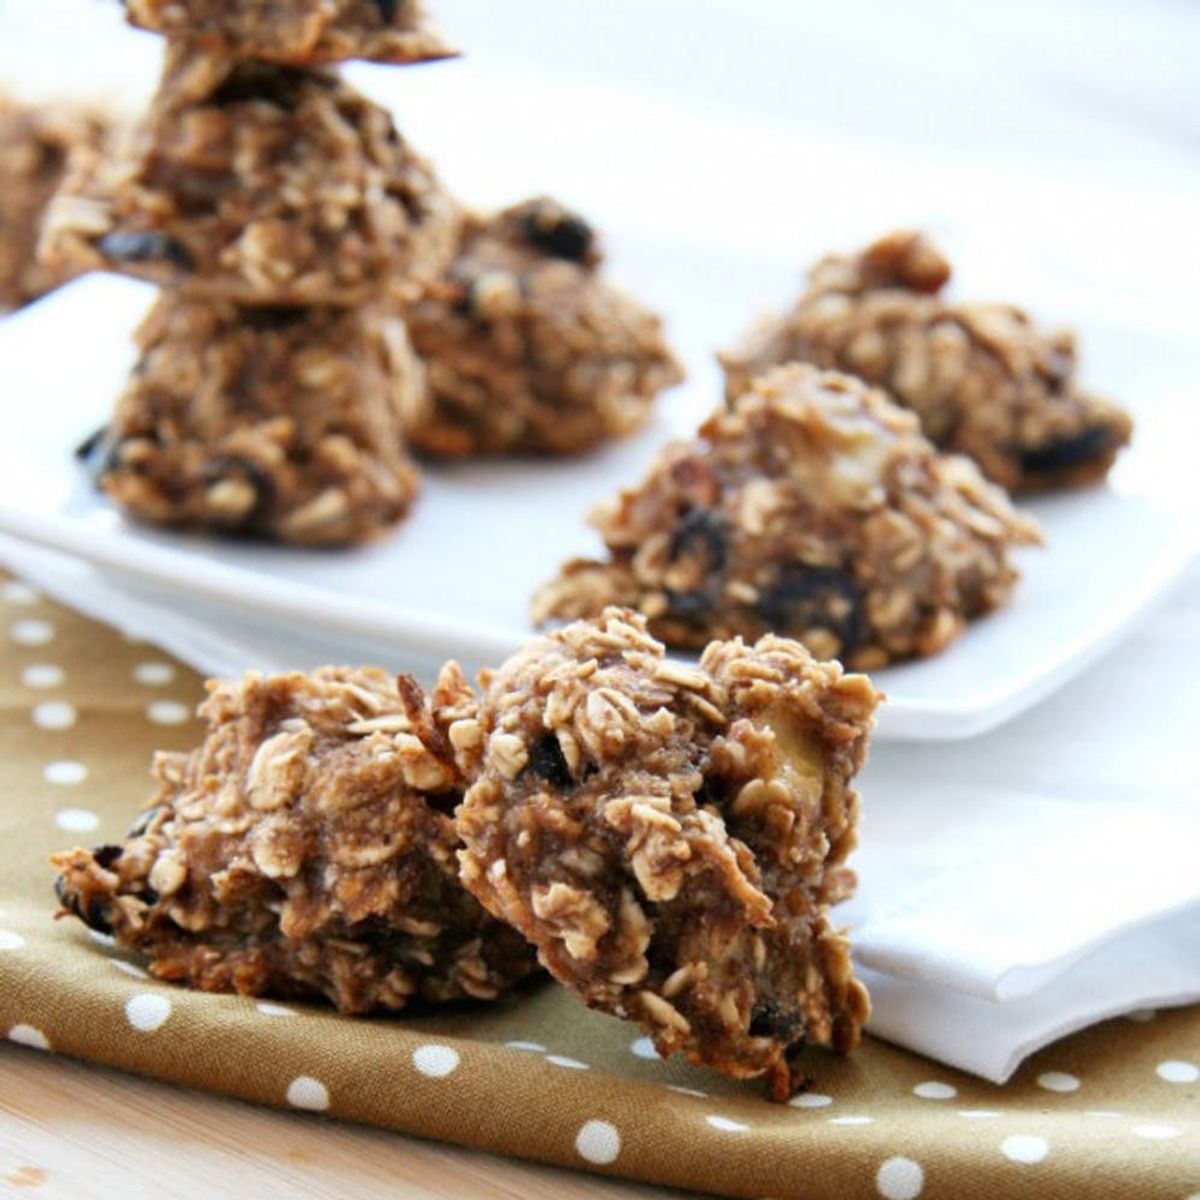 Cookies for Breakfast? Kick Start Your Morning With Energy Packed Cookies